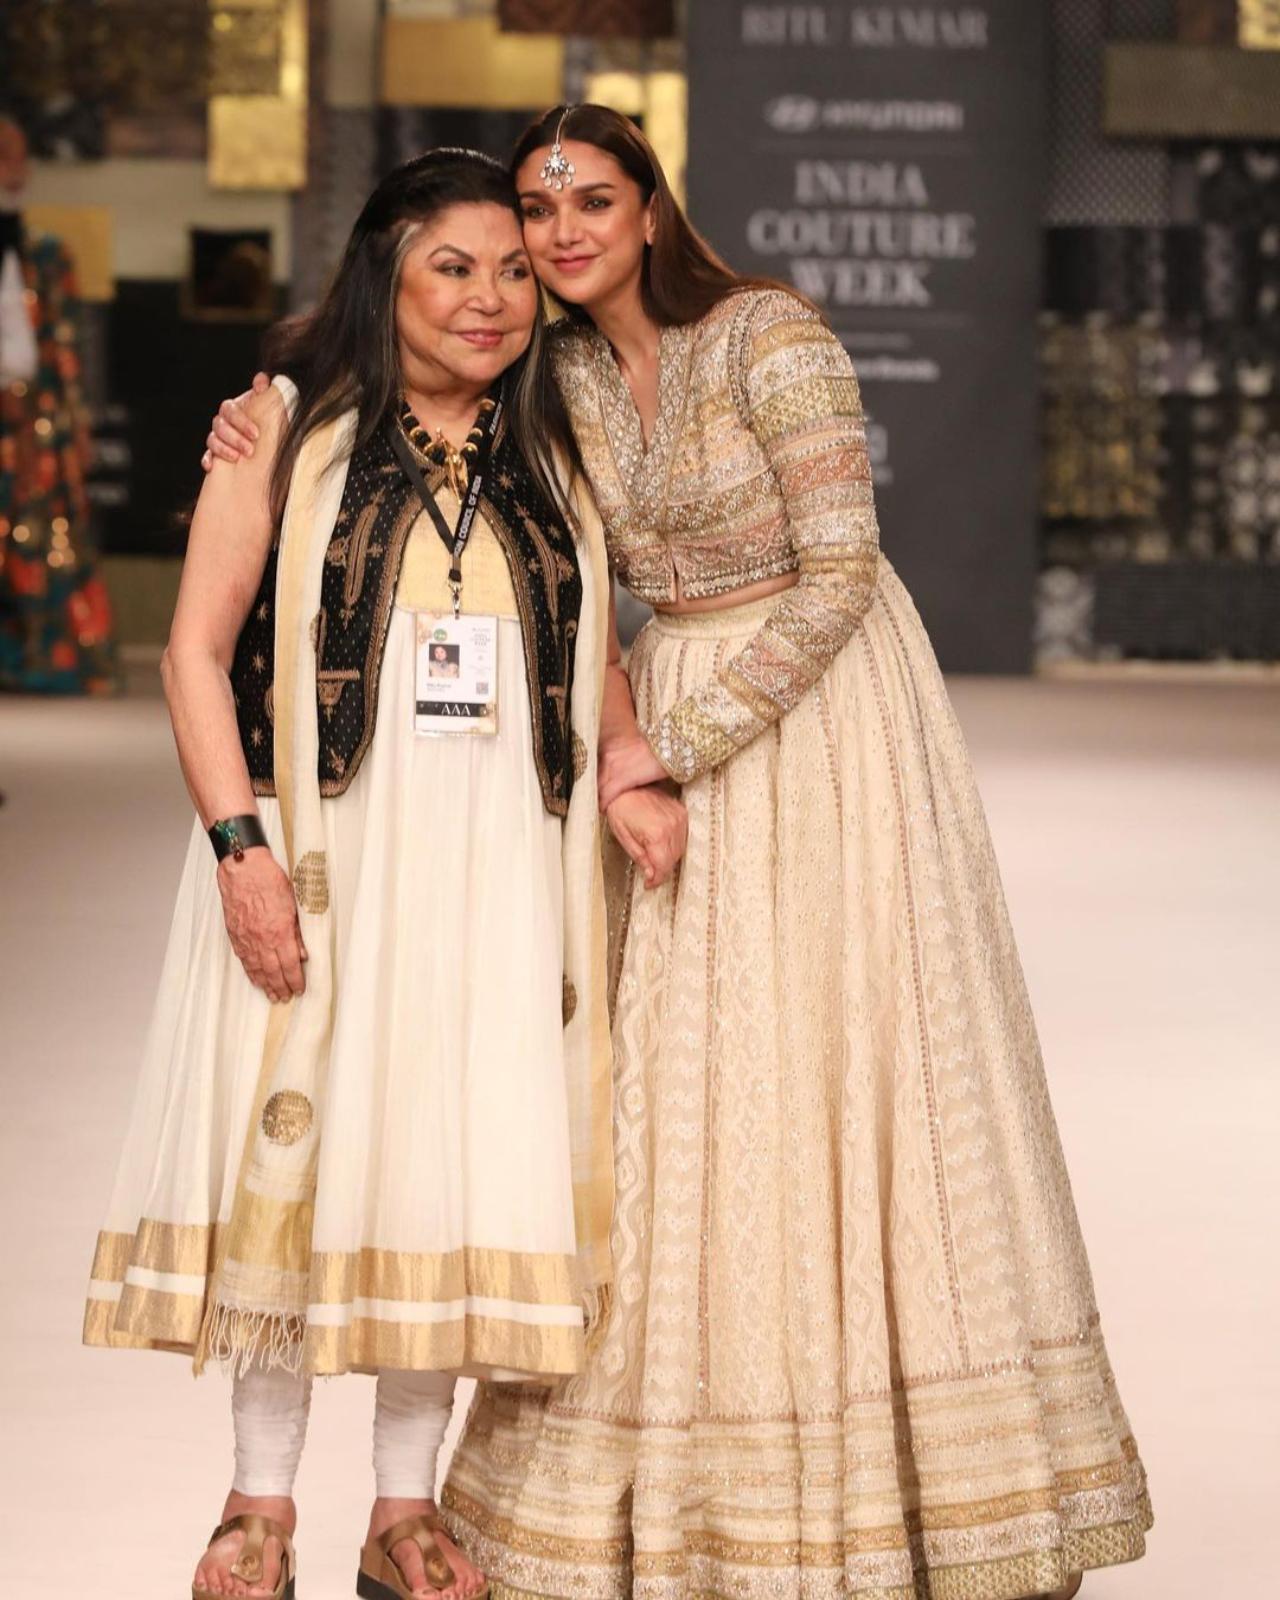 In a show that marked her comeback to India Couture Week after a decade, couturier Ritu Kumar presented her collection titled ‘The OG’ that featured ensembles which combined traditional crafts like kasab and kashidakari into modern outfits through classic couture tailoring. The collection brings out an alternative femininity that celebrates rich and heritage textiles